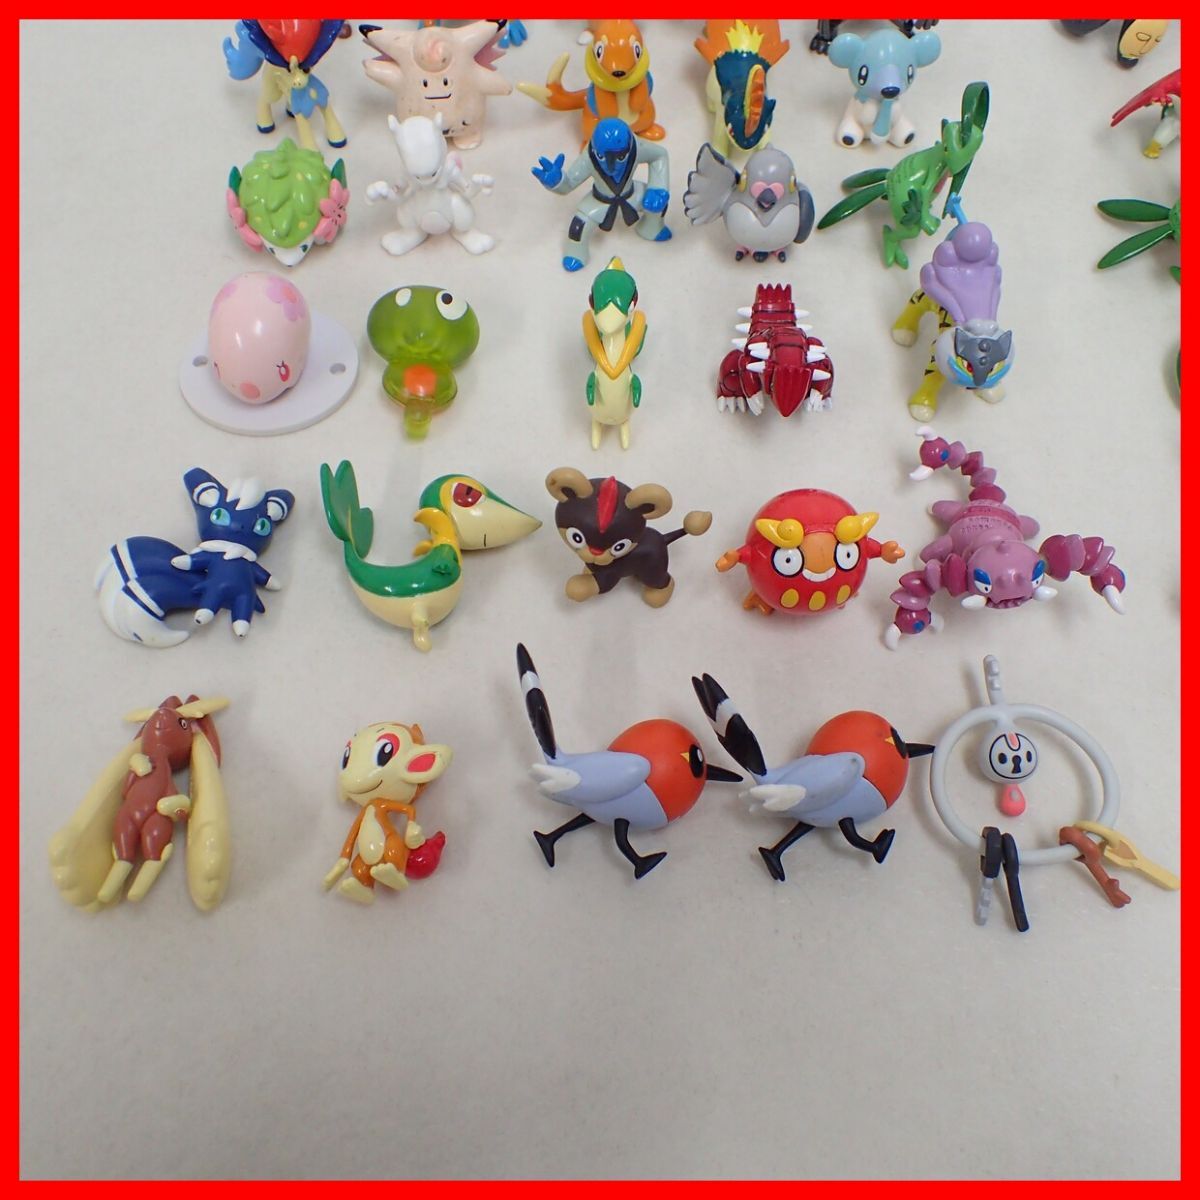 ∂ Pokemon figure monster collection clear contains Pikachu / acid kn/resi Ram etc. 100 point large amount set monkoreTOMY Tommy [10